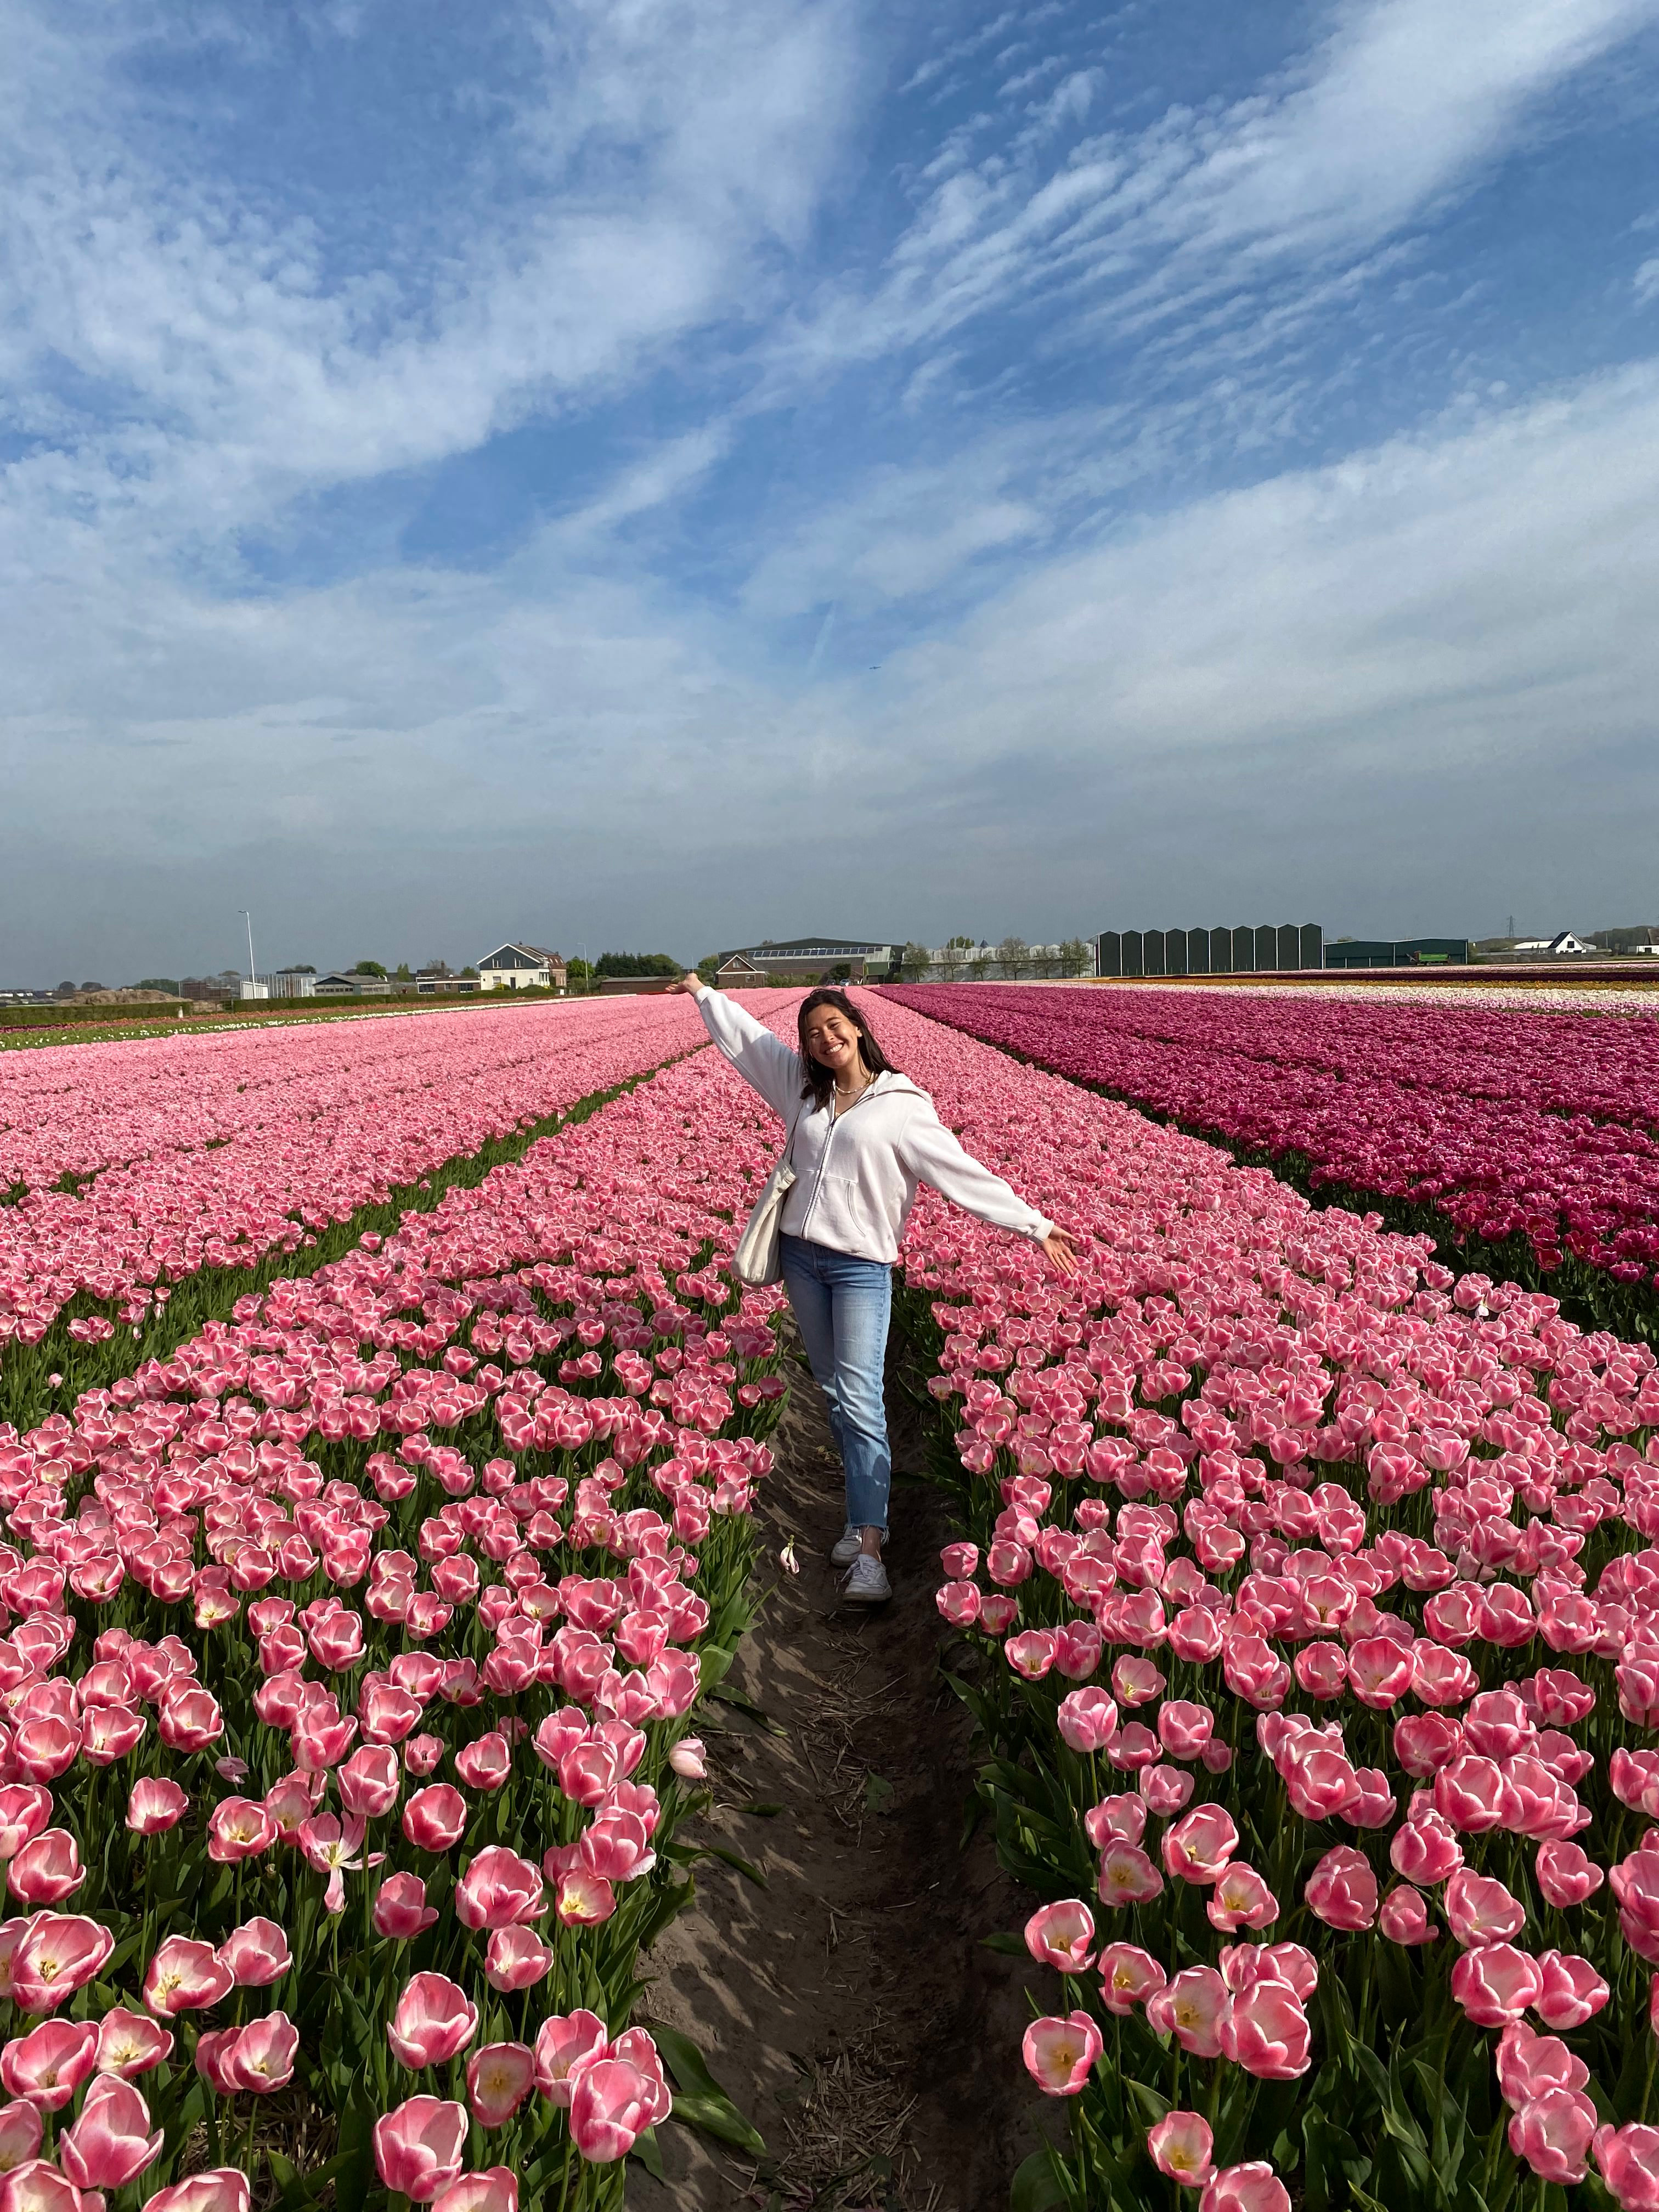 the Netherlands is famous for its many tulip fields in the spring months